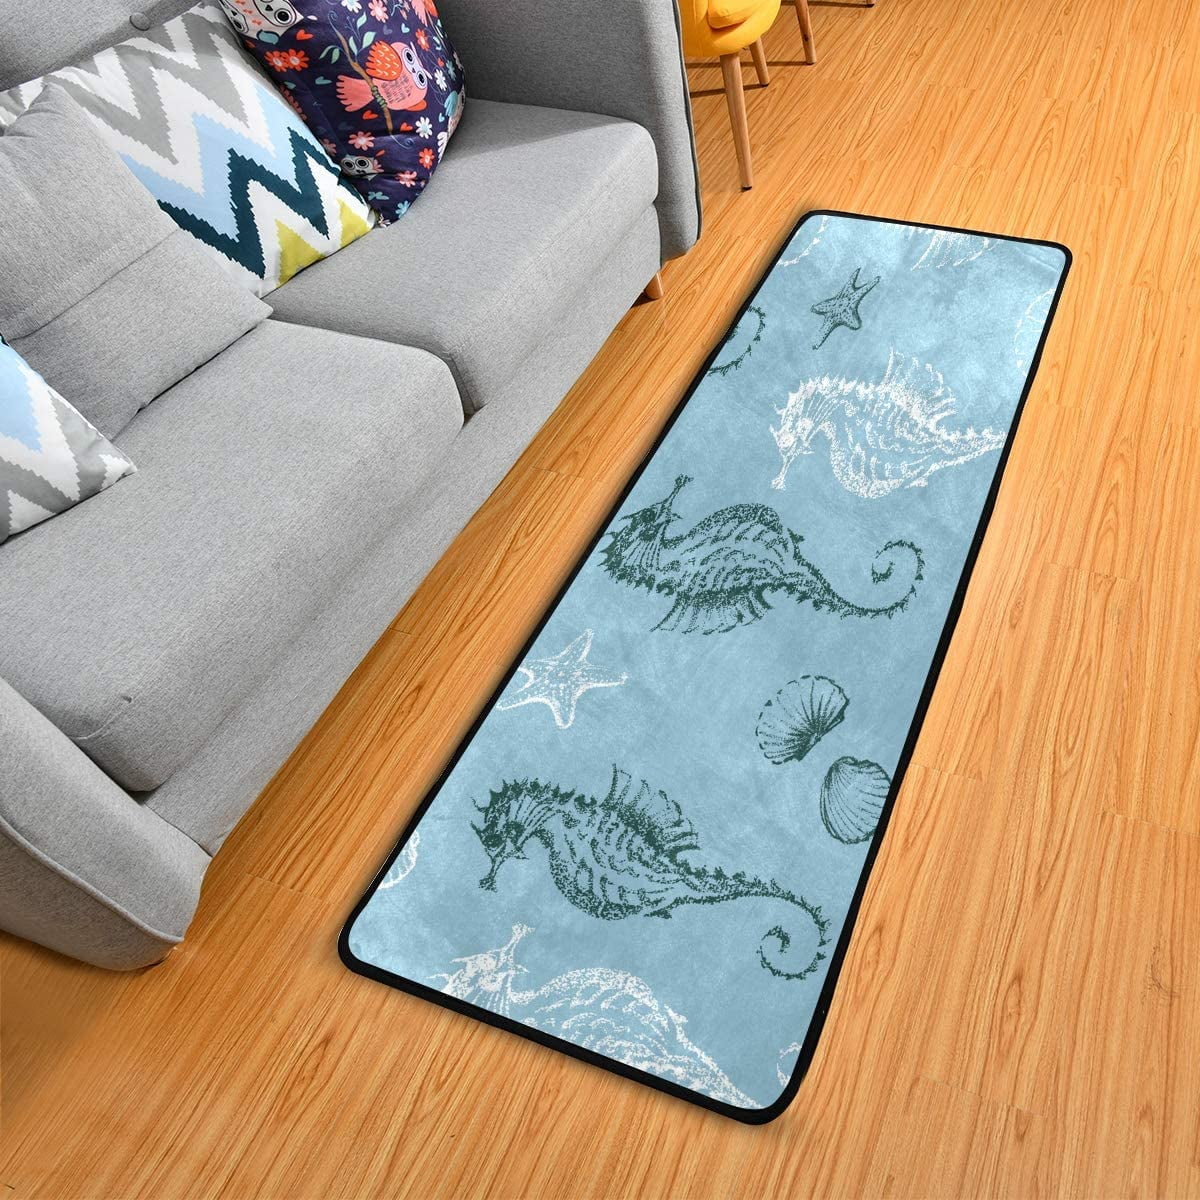 Cool Steampunk Gears Floor Pad Rugs Quick Dry Throw Bath Rugs Yoga Mat Non-Slip Throw Rugs Carpet Bedroom Livingroom Sitting-Room Queen Size Area Rug Home Decor 